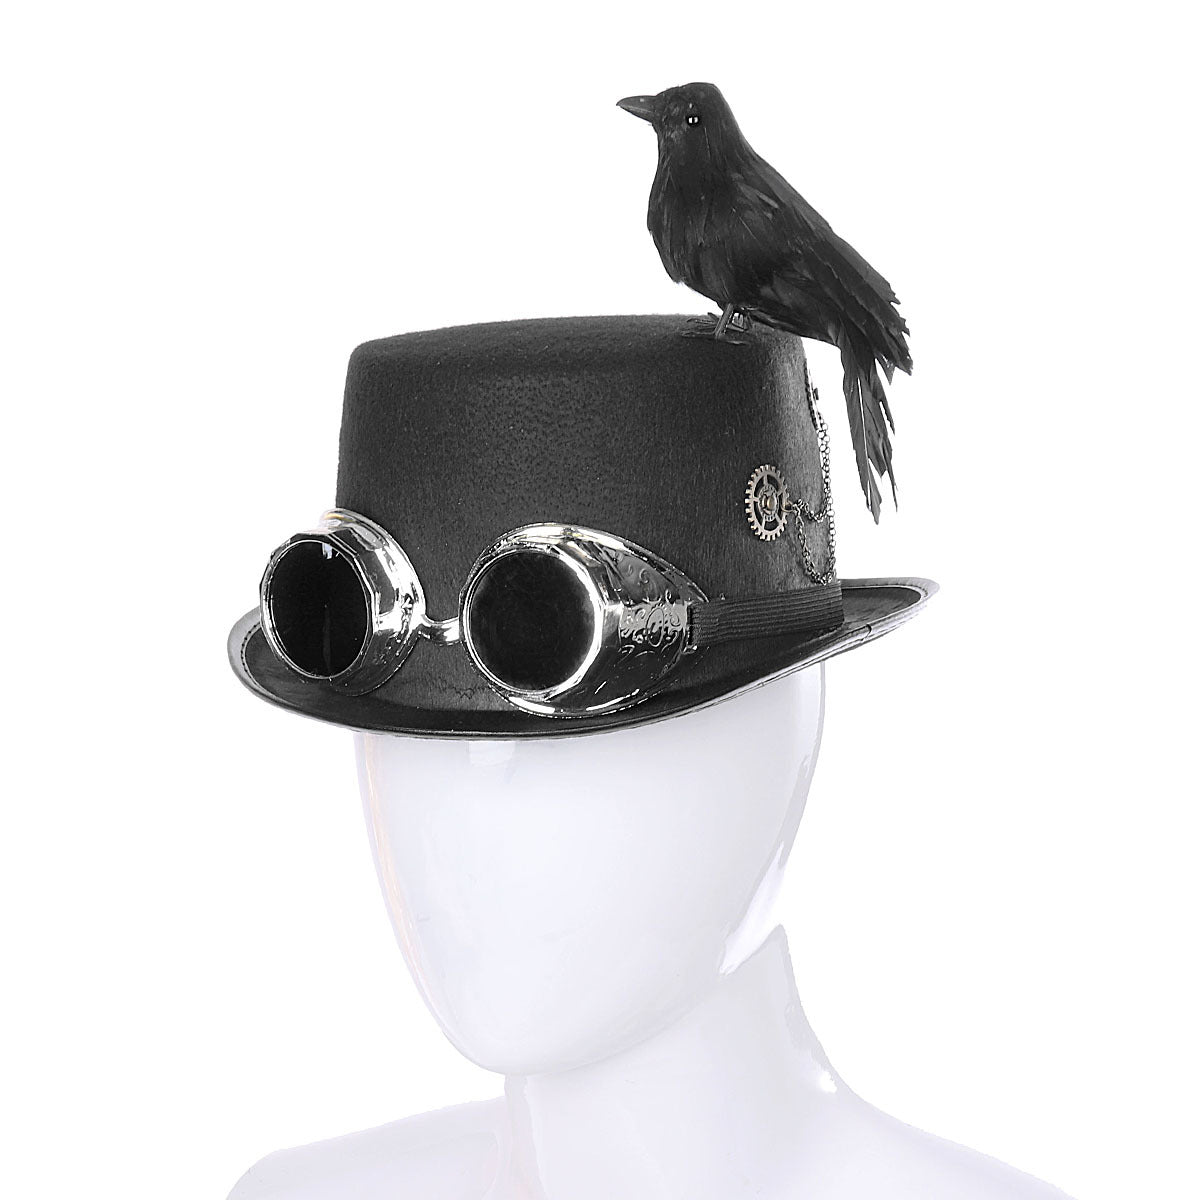 Maramalive™ Steampunk crow hat with goggles.